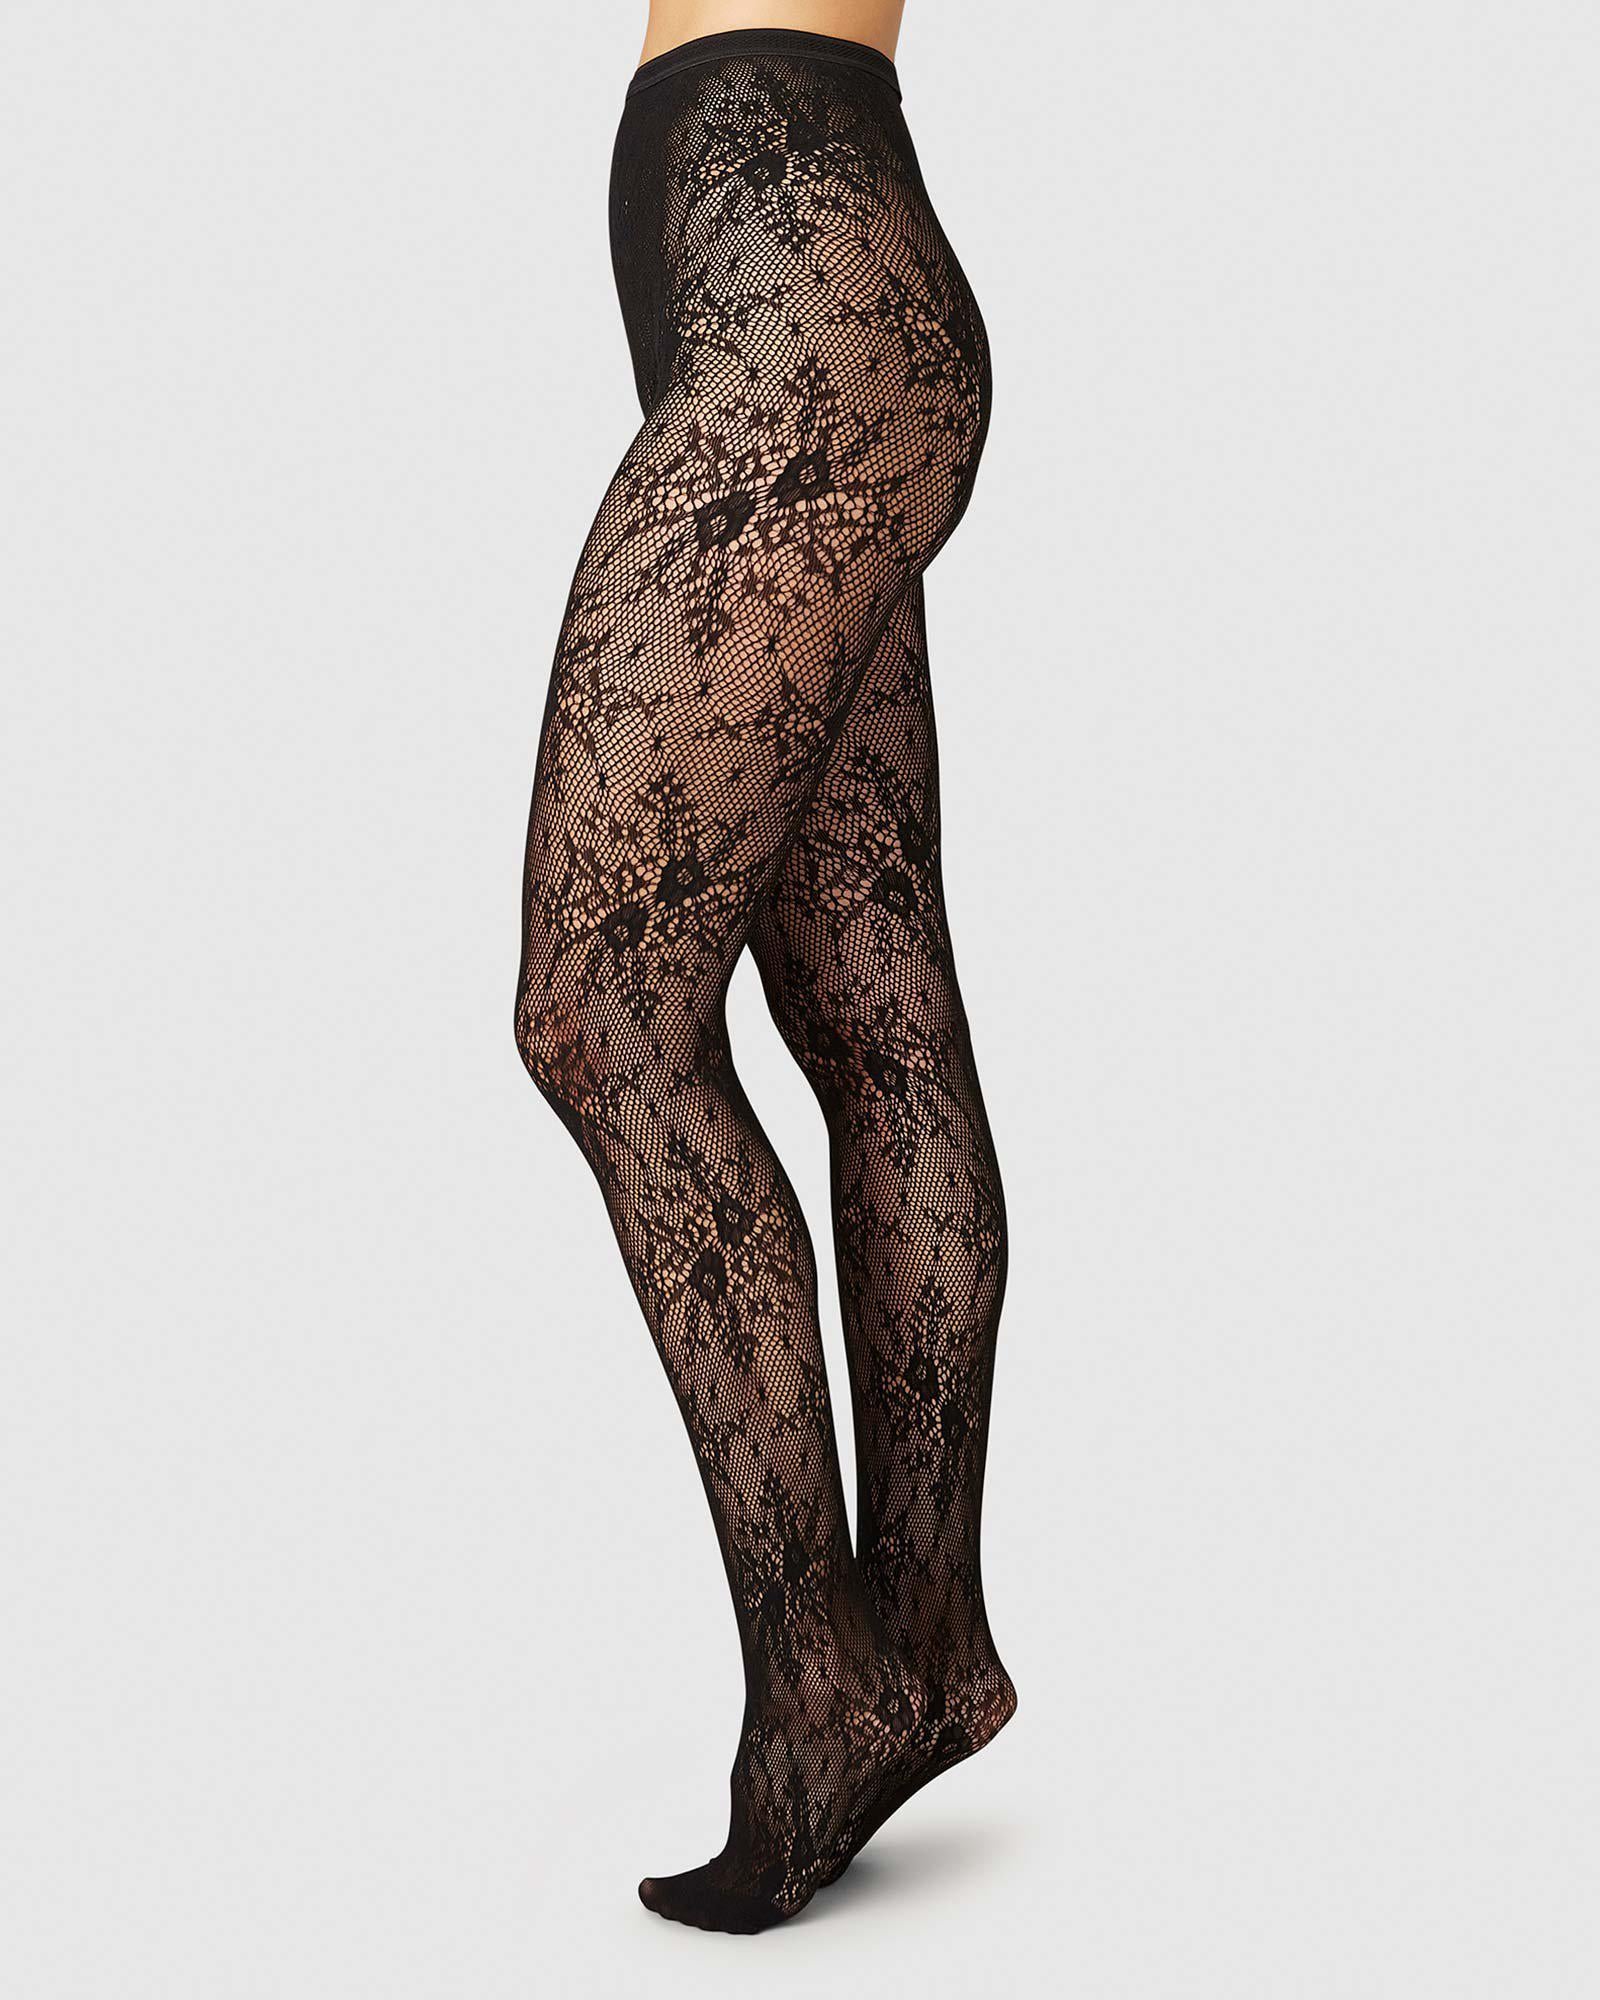 Rosa Lace Tights Black  Buy now - Swedish Stockings